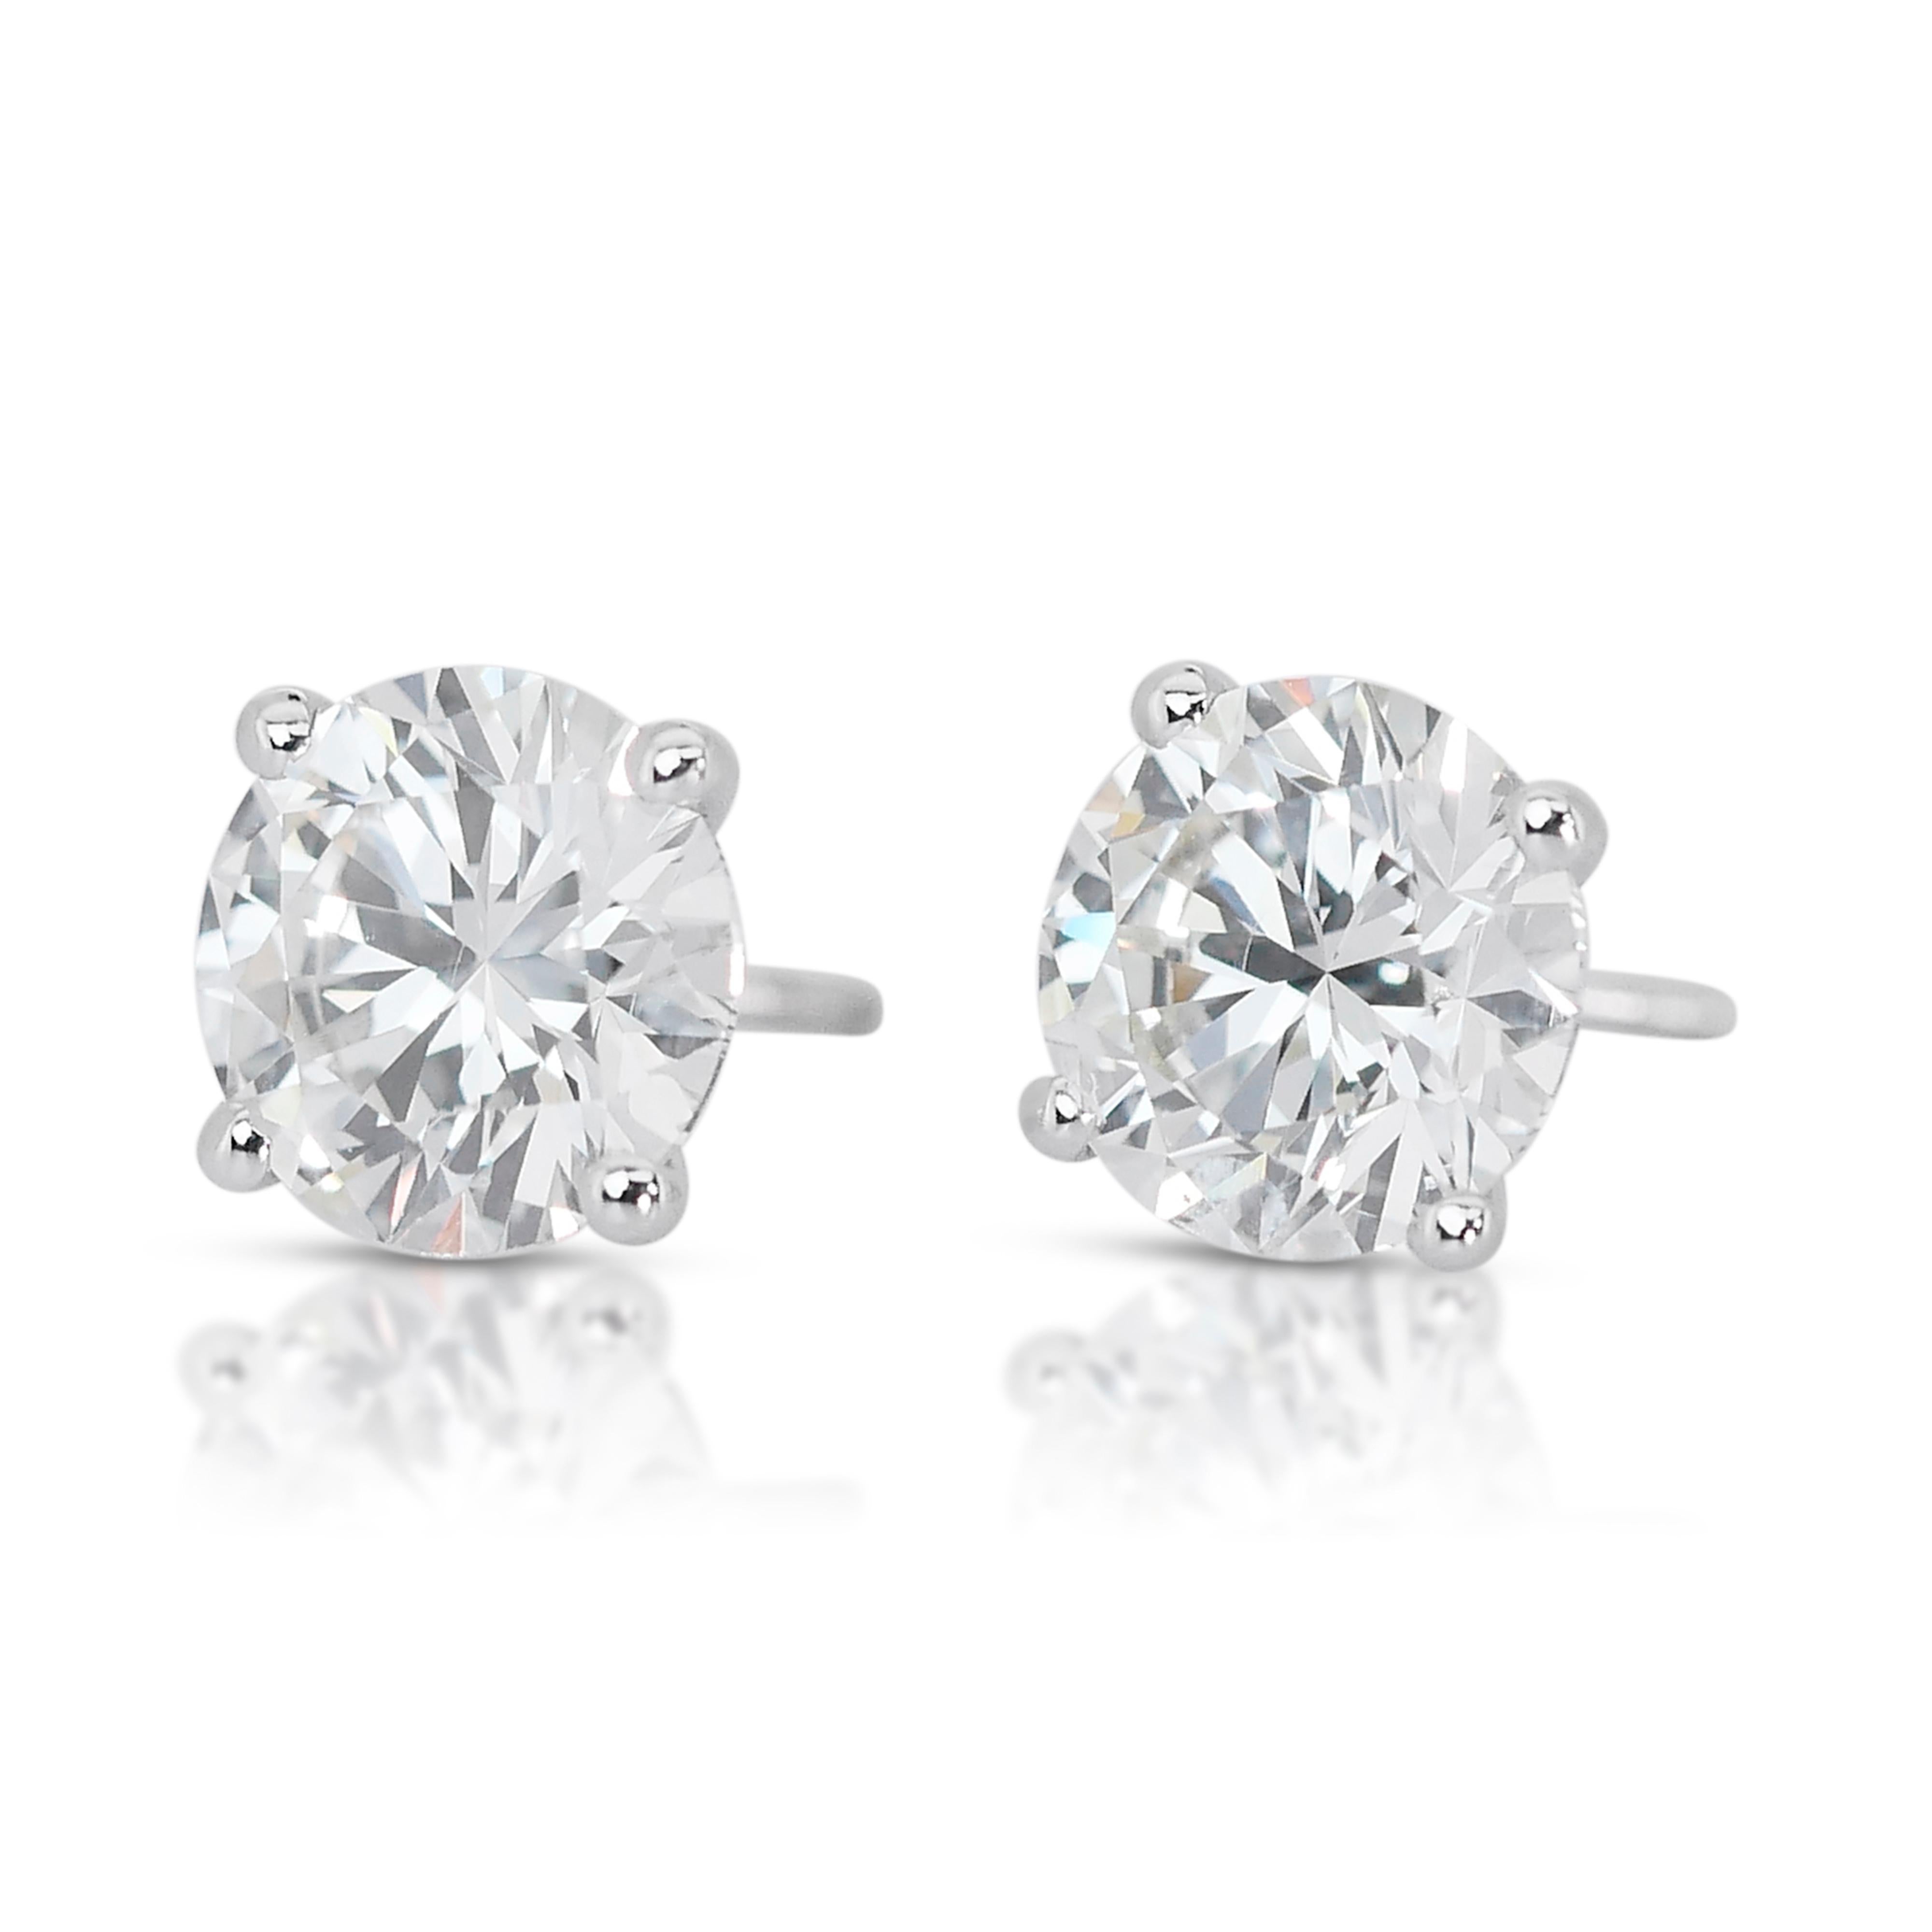 Gleaming 18k White Gold Natural Diamond Stud Earrings w/3.10 ct - GIA Certified

These captivating diamond stud earrings embody timeless elegance with a touch of modern luxury. Crafted in gleaming 18k white gold, the earrings showcase two stunning